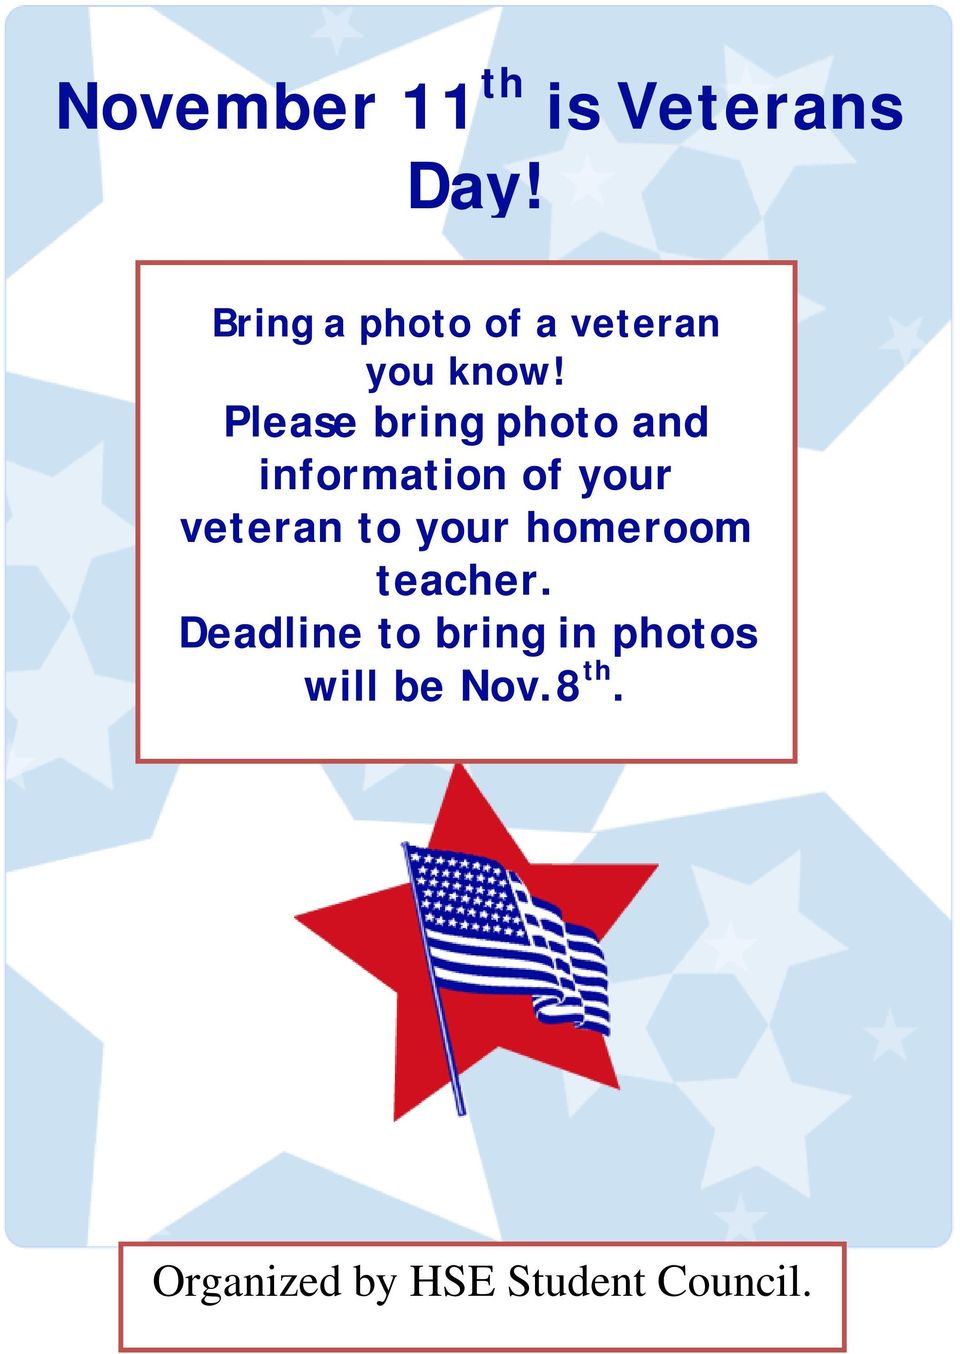 Please bring photo and information of your veteran to